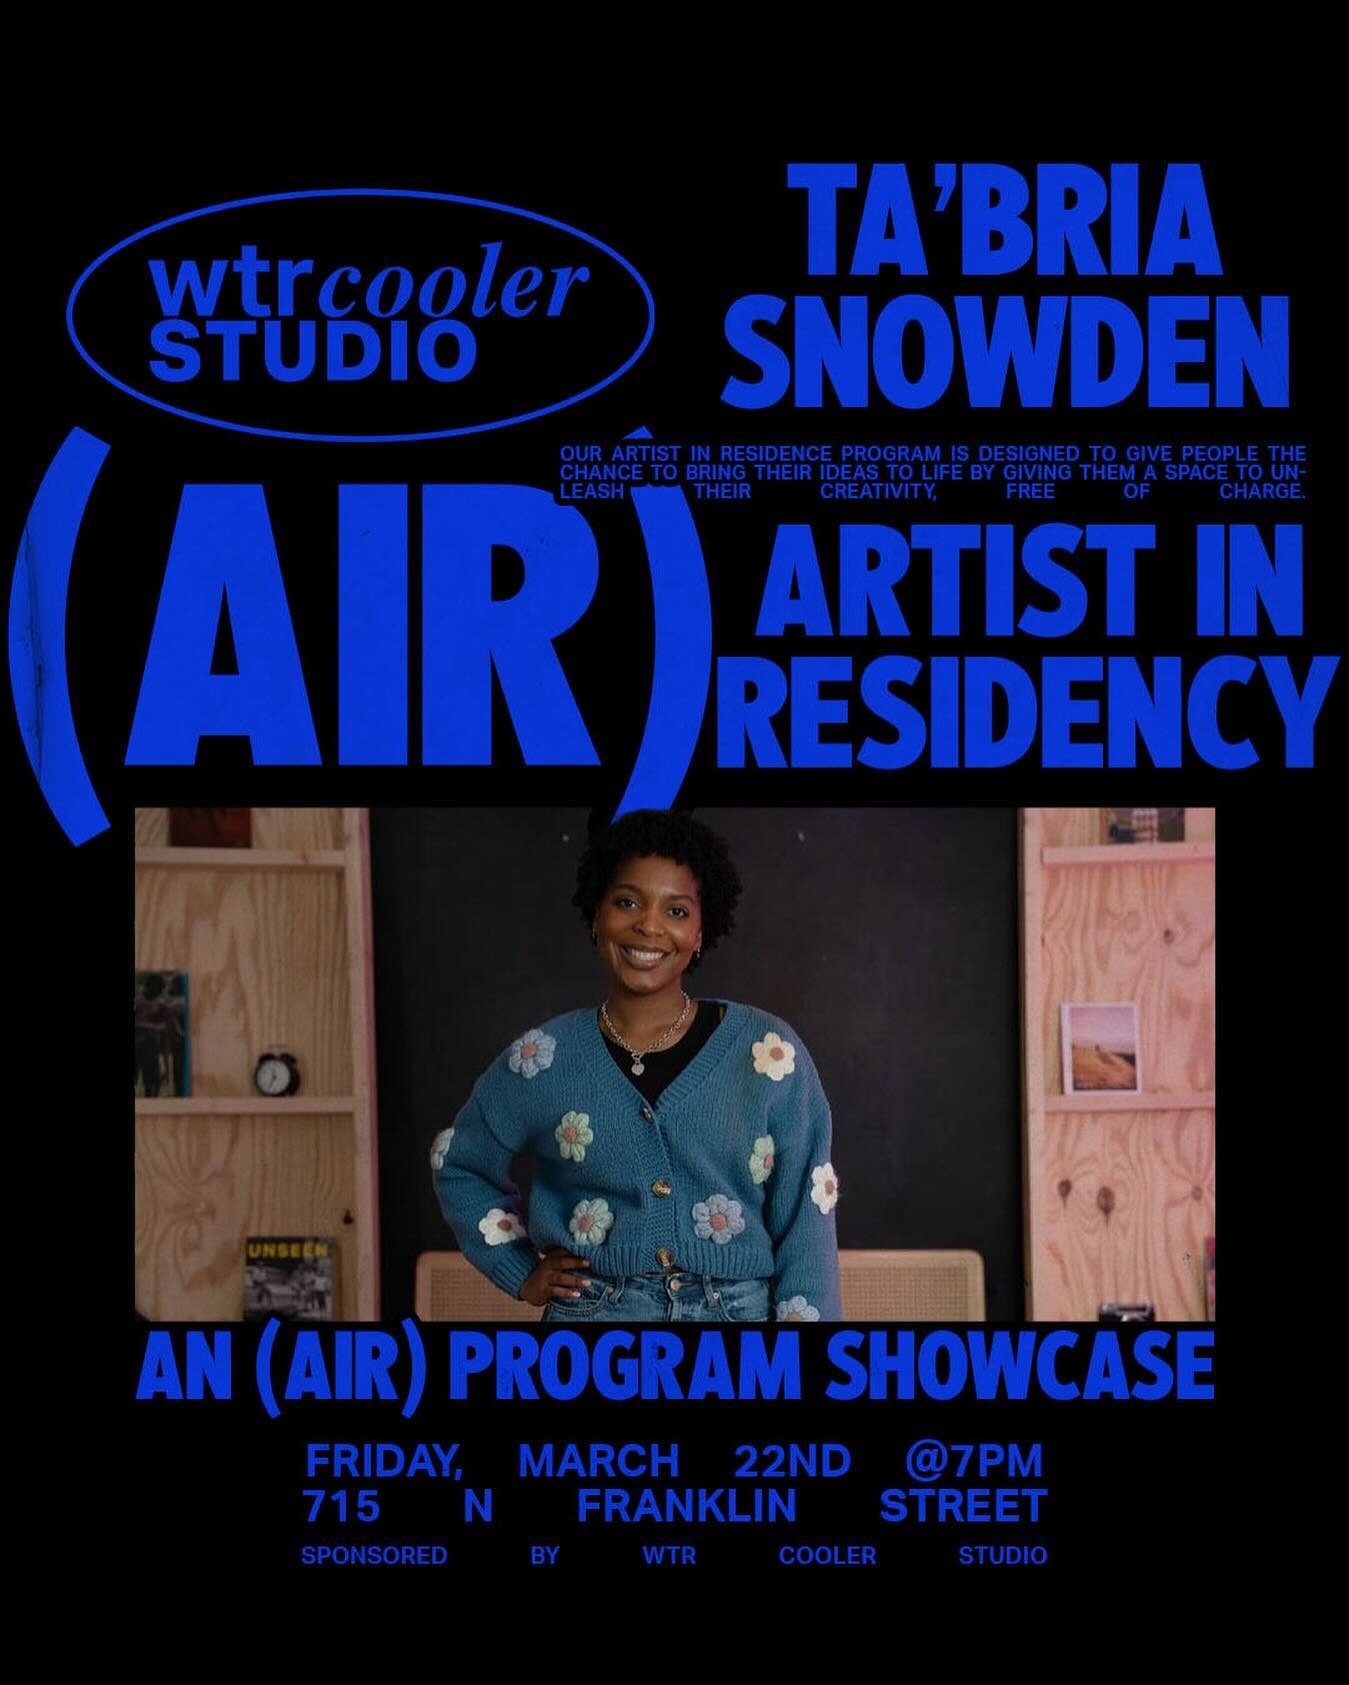 We&rsquo;re honored to feature Ta&rsquo;bria Snowden as our Artist in Residency at WTR Cooler Studio. ✨

Ta&rsquo;bria brings a vital narrative to the forefront with her documentary work for Sexual Assault Awareness Month. This project, showcasing on